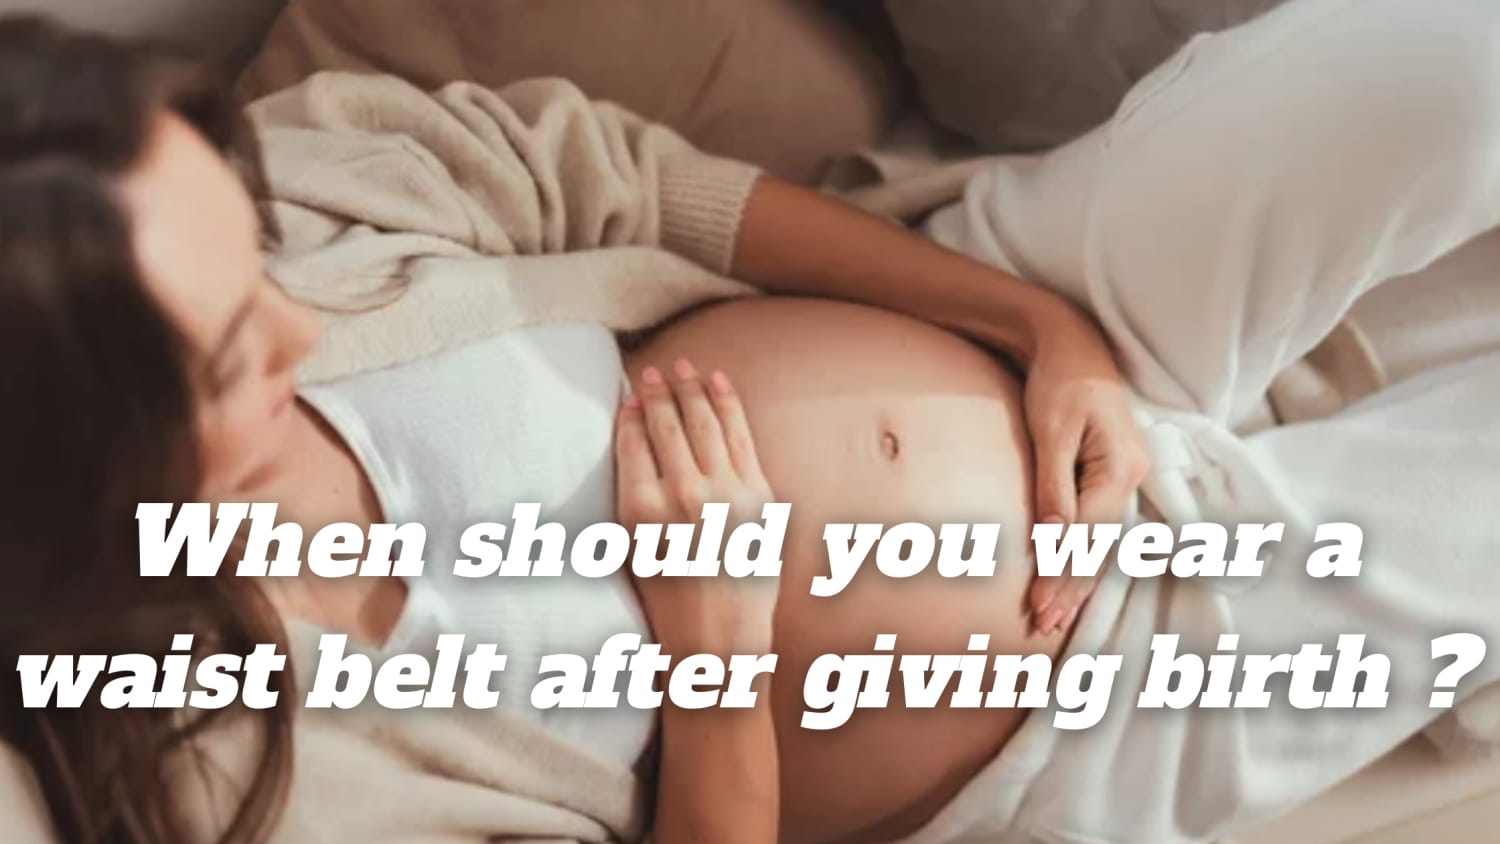 When should you wear a waist belt after giving birth ?